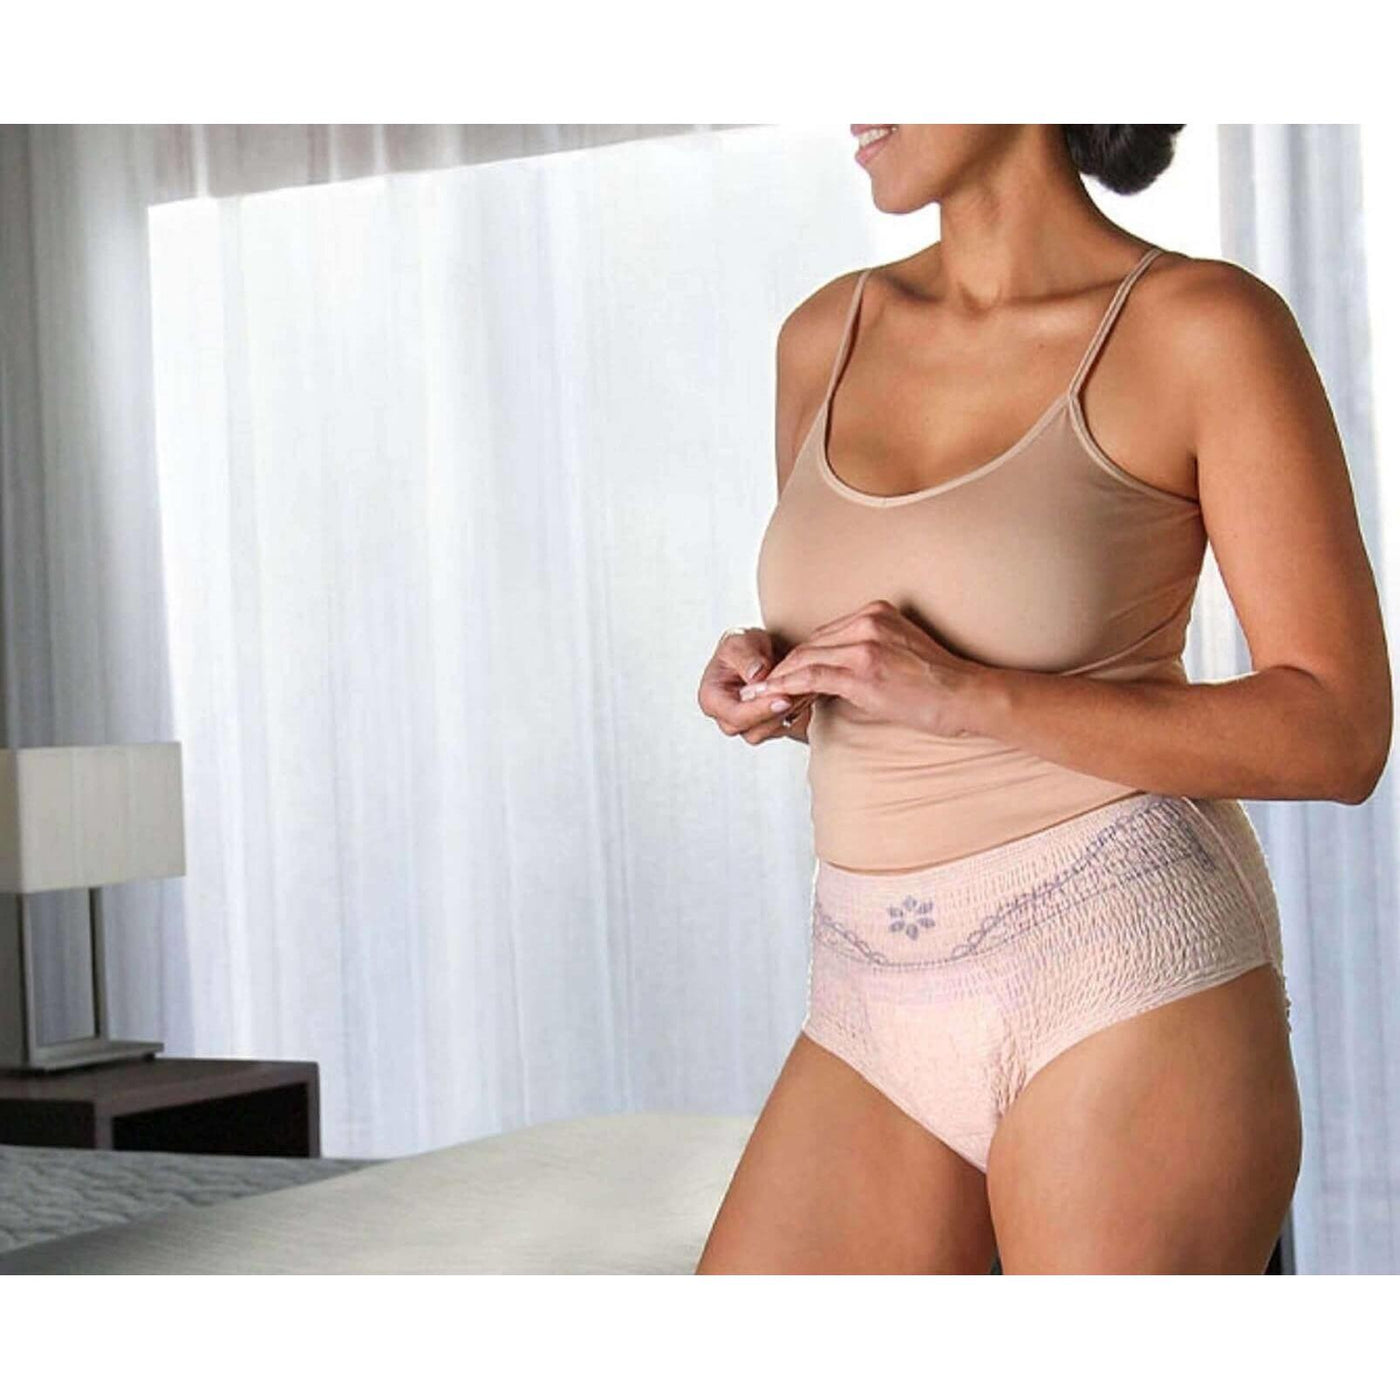 Product Of Depend Fit Flex Large Maximum Absorbency Underwear For